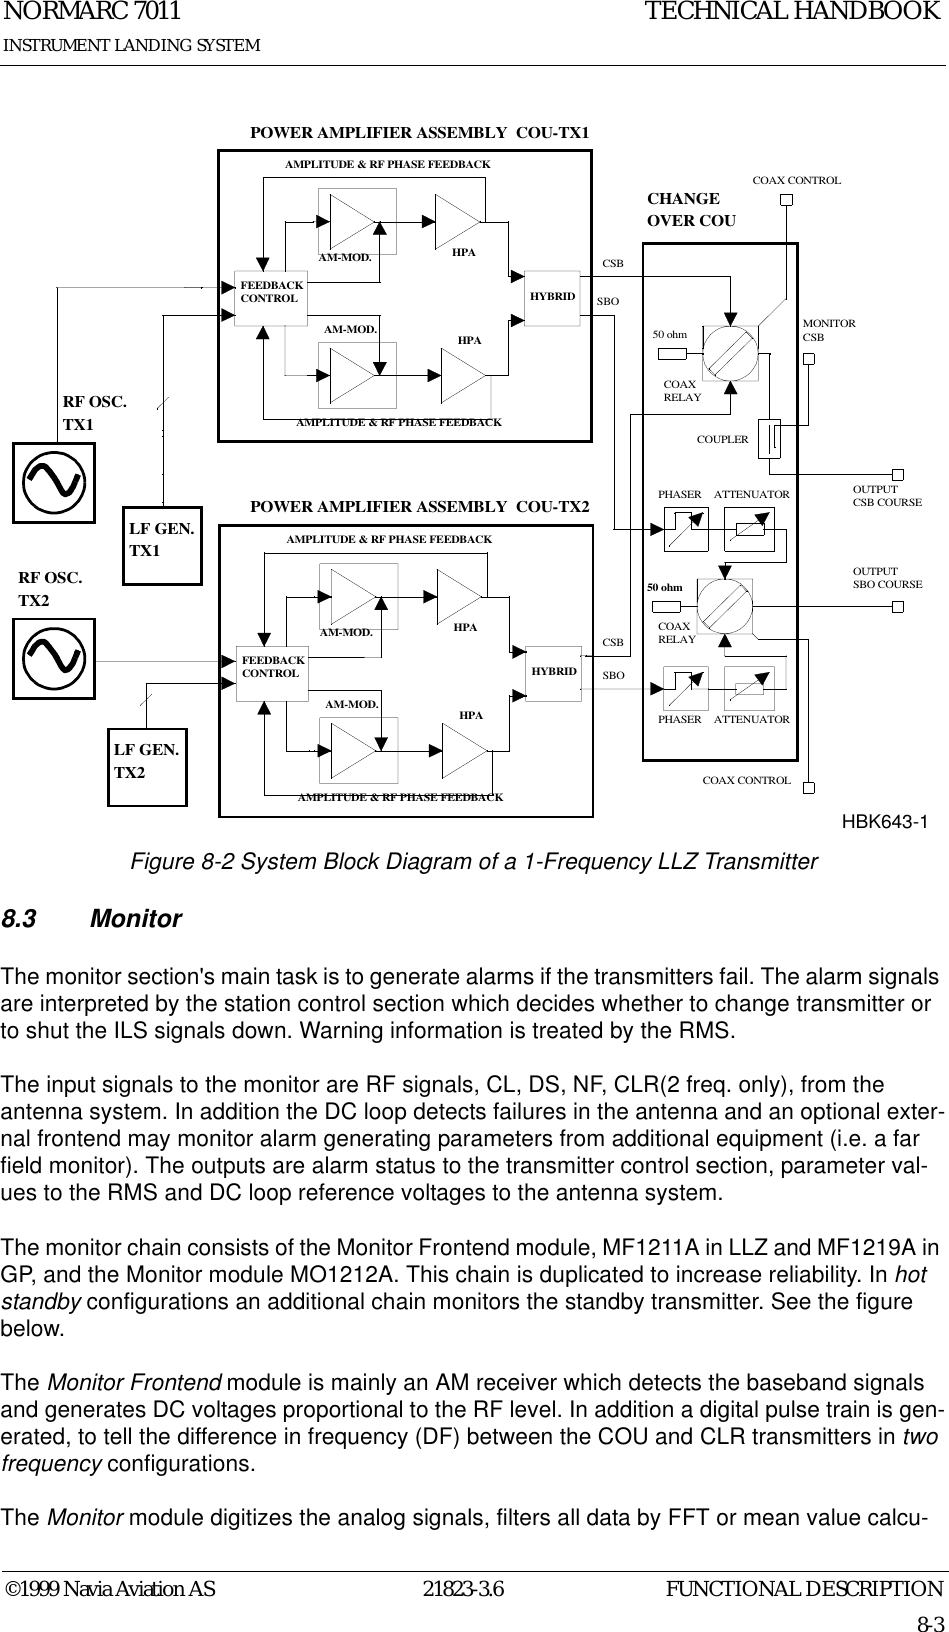 FUNCTIONAL DESCRIPTIONNORMARC 701121823-3.68-3©1999 Navia Aviation ASINSTRUMENT LANDING SYSTEMTECHNICAL HANDBOOKFigure 8-2 System Block Diagram of a 1-Frequency LLZ Transmitter8.3 MonitorThe monitor section&apos;s main task is to generate alarms if the transmitters fail. The alarm signals are interpreted by the station control section which decides whether to change transmitter or to shut the ILS signals down. Warning information is treated by the RMS.The input signals to the monitor are RF signals, CL, DS, NF, CLR(2 freq. only), from the antenna system. In addition the DC loop detects failures in the antenna and an optional exter-nal frontend may monitor alarm generating parameters from additional equipment (i.e. a far field monitor). The outputs are alarm status to the transmitter control section, parameter val-ues to the RMS and DC loop reference voltages to the antenna system.The monitor chain consists of the Monitor Frontend module, MF1211A in LLZ and MF1219A in GP, and the Monitor module MO1212A. This chain is duplicated to increase reliability. In hot standby configurations an additional chain monitors the standby transmitter. See the figure below.The Monitor Frontend module is mainly an AM receiver which detects the baseband signals and generates DC voltages proportional to the RF level. In addition a digital pulse train is gen-erated, to tell the difference in frequency (DF) between the COU and CLR transmitters in two frequency configurations.The Monitor module digitizes the analog signals, filters all data by FFT or mean value calcu-50 ohmPHASER ATTENUATORPHASER ATTENUATORCOAXRELAYCOAXRELAYCSBCSBSBOSBOOUTPUTSBO COURSEOUTPUTCSB COURSEMONITORCSBCOUPLERCOAX CONTROLCOAX CONTROLRF OSC.TX2RF OSC.TX1LF GEN.TX1LF GEN.TX2AMPLITUDE &amp; RF PHASE FEEDBACKAM-MOD. HPAHPAHYBRIDFEEDBACKCONTROLAM-MOD.AMPLITUDE &amp; RF PHASE FEEDBACKCHANGEOVER COU POWER AMPLIFIER ASSEMBLY  COU-TX2AMPLITUDE &amp; RF PHASE FEEDBACKAM-MOD. HPAHPAHYBRIDFEEDBACKCONTROLAM-MOD.AMPLITUDE &amp; RF PHASE FEEDBACK POWER AMPLIFIER ASSEMBLY  COU-TX150 ohmHBK643-1